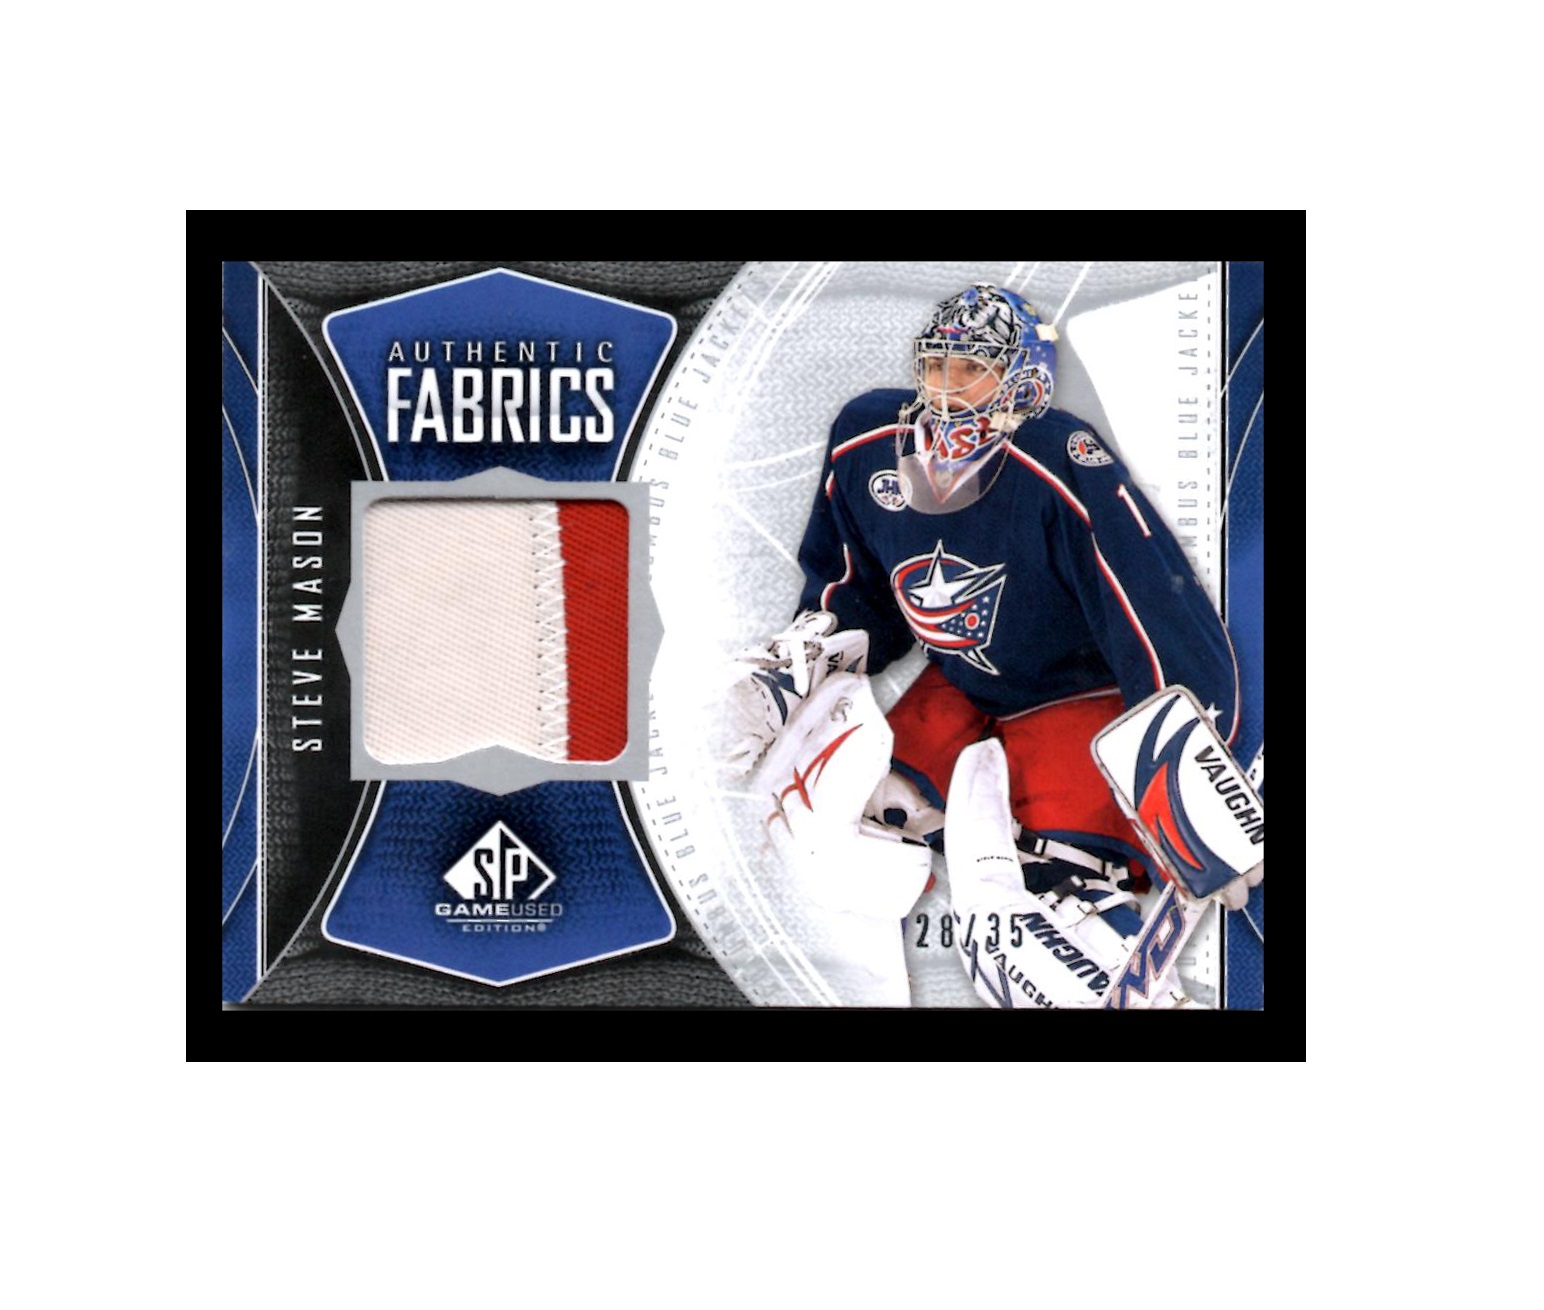 2009-10 SP Game Used Authentic Fabrics Patches #AFSM Steve Mason (100-X81-BLUEJACKETS)